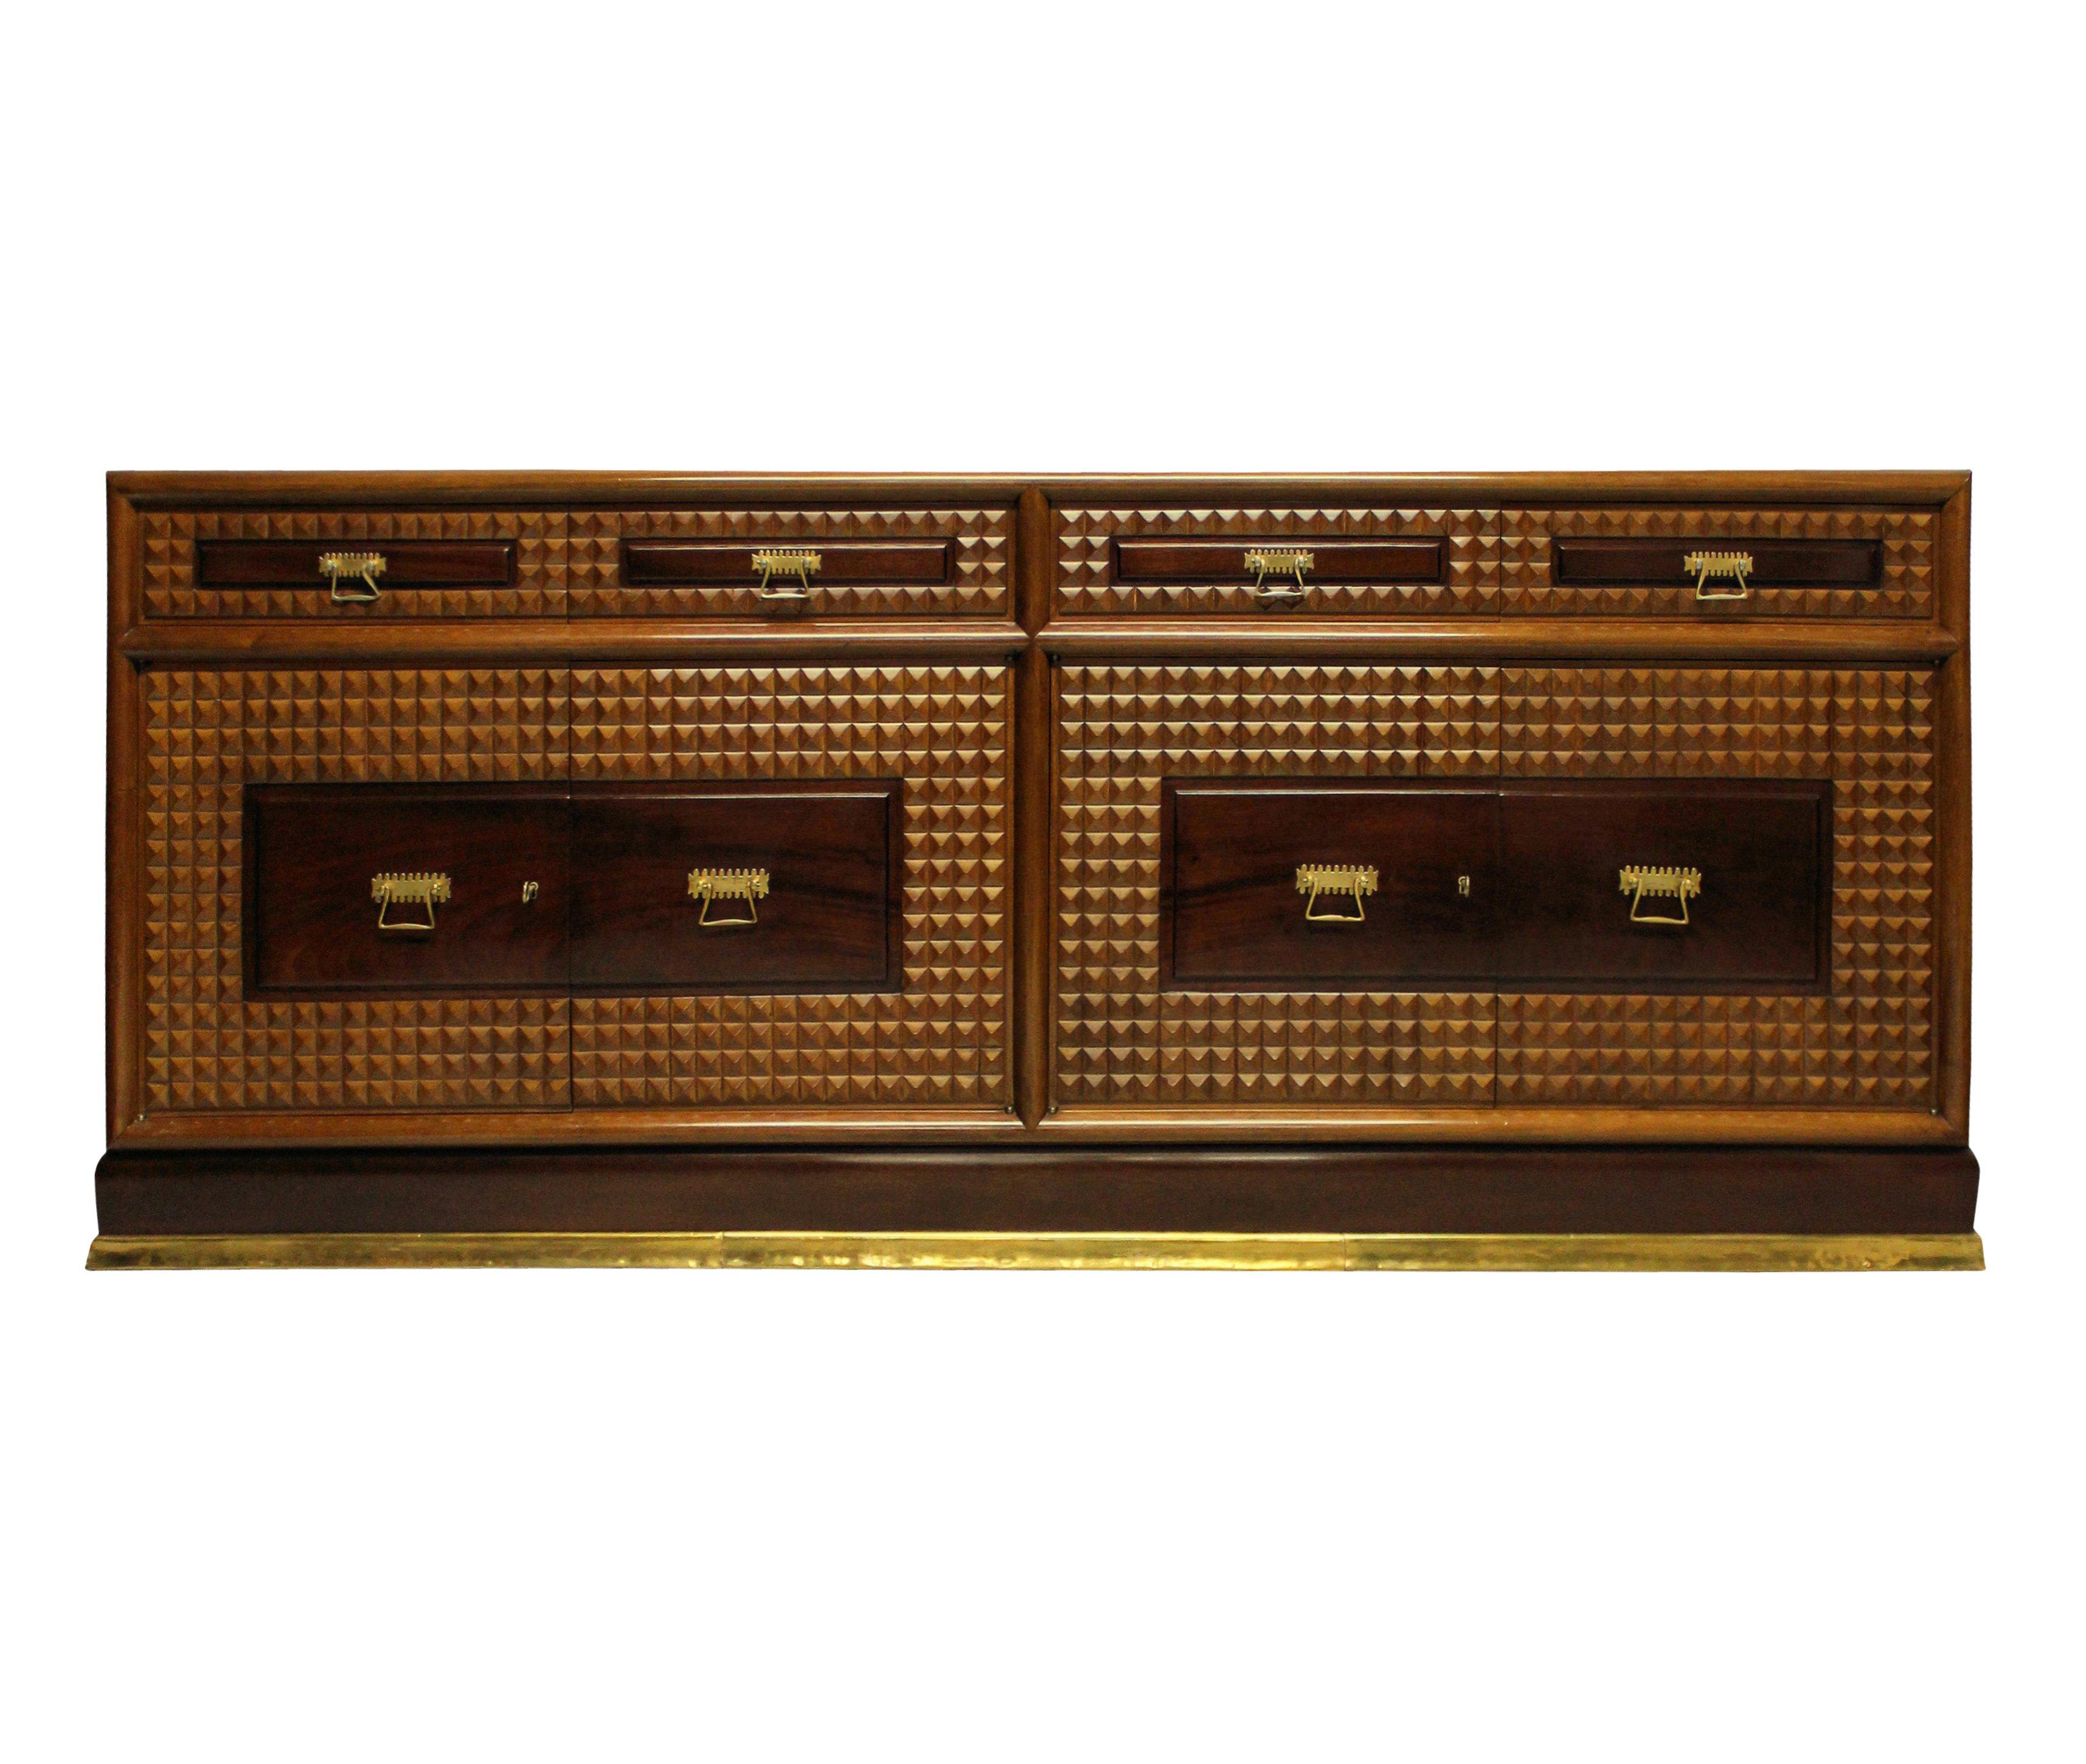 A pair of monumental Italian credenza's of superb quality by Atelier Borsani. Each with central cupboards lined in blond wood and four drawers. The exterior is comprised of various walnut veneers, with a finely carved geometric diamond pattern